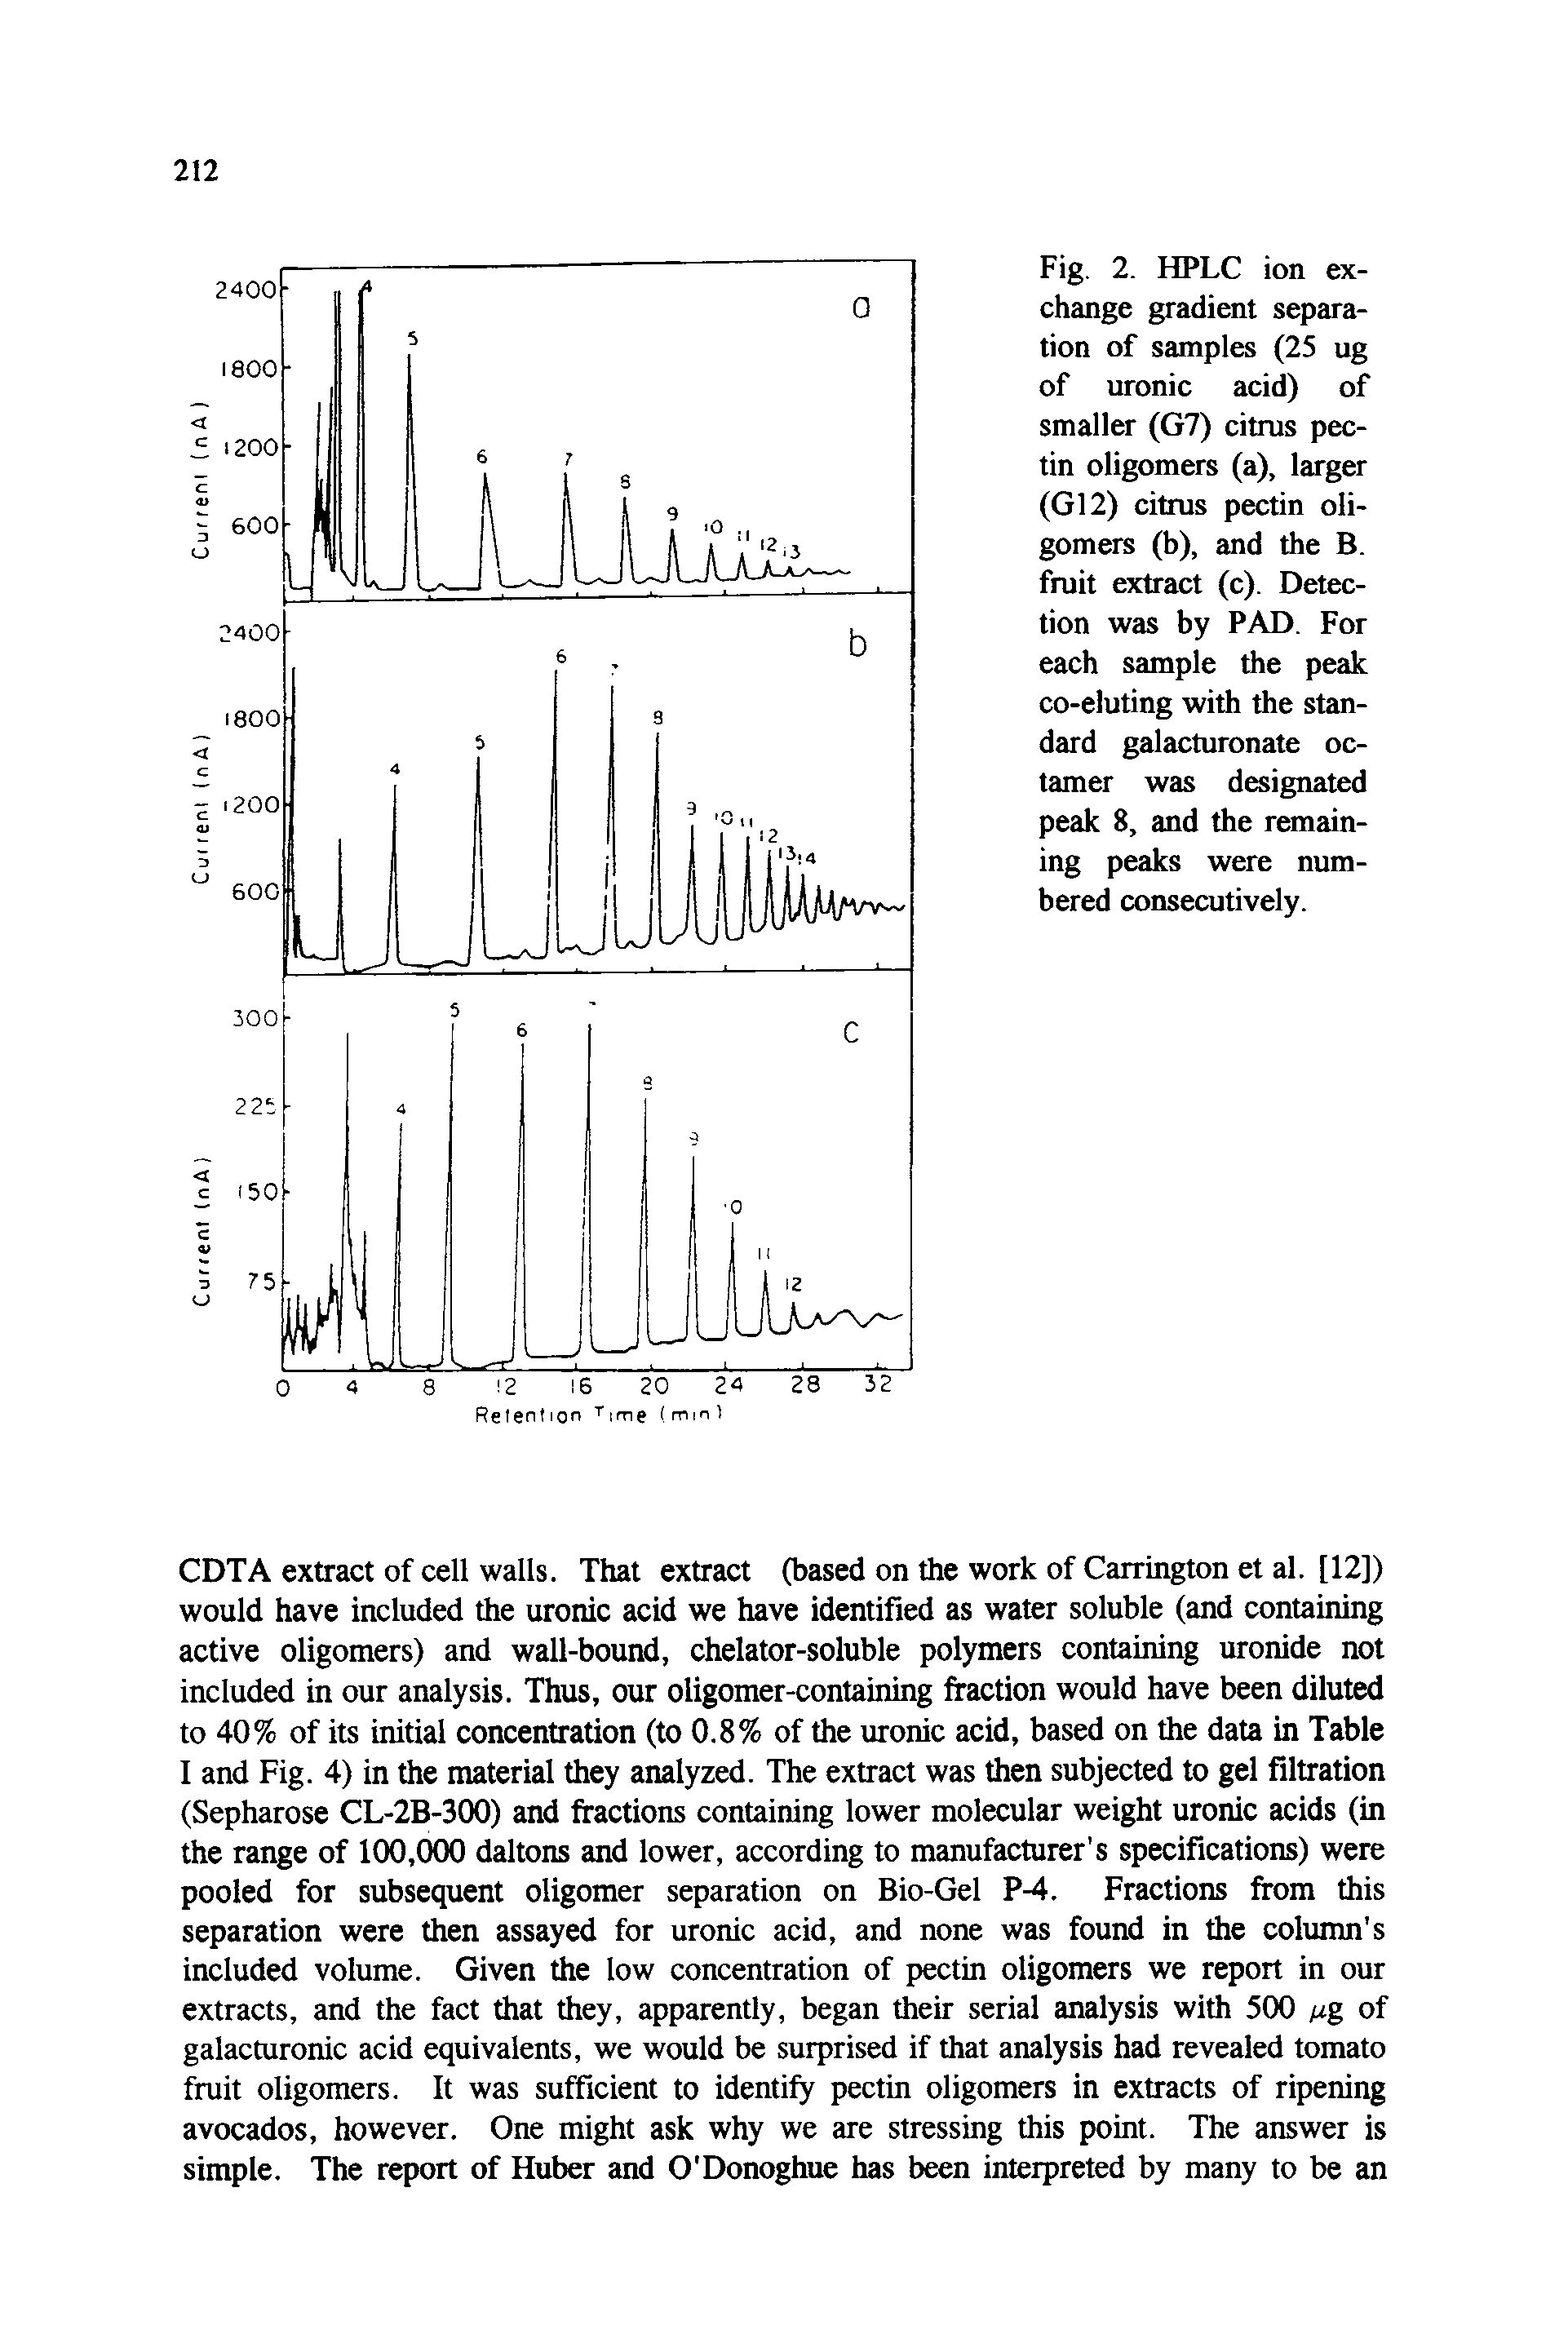 Fig. 2. HPLC ion exchange gradient separation of samples (25 ug of uronic acid) of smaller (G7) citrus pectin oligomers (a), larger (G12) citrus pectin oligomers (b), and the B. fruit extract (c). Detection was by PAD. For each sample the peak co-eluting with the standard galacturonate oc-tamer was designated peak 8, and the remaining peaks were numbered consecutively.